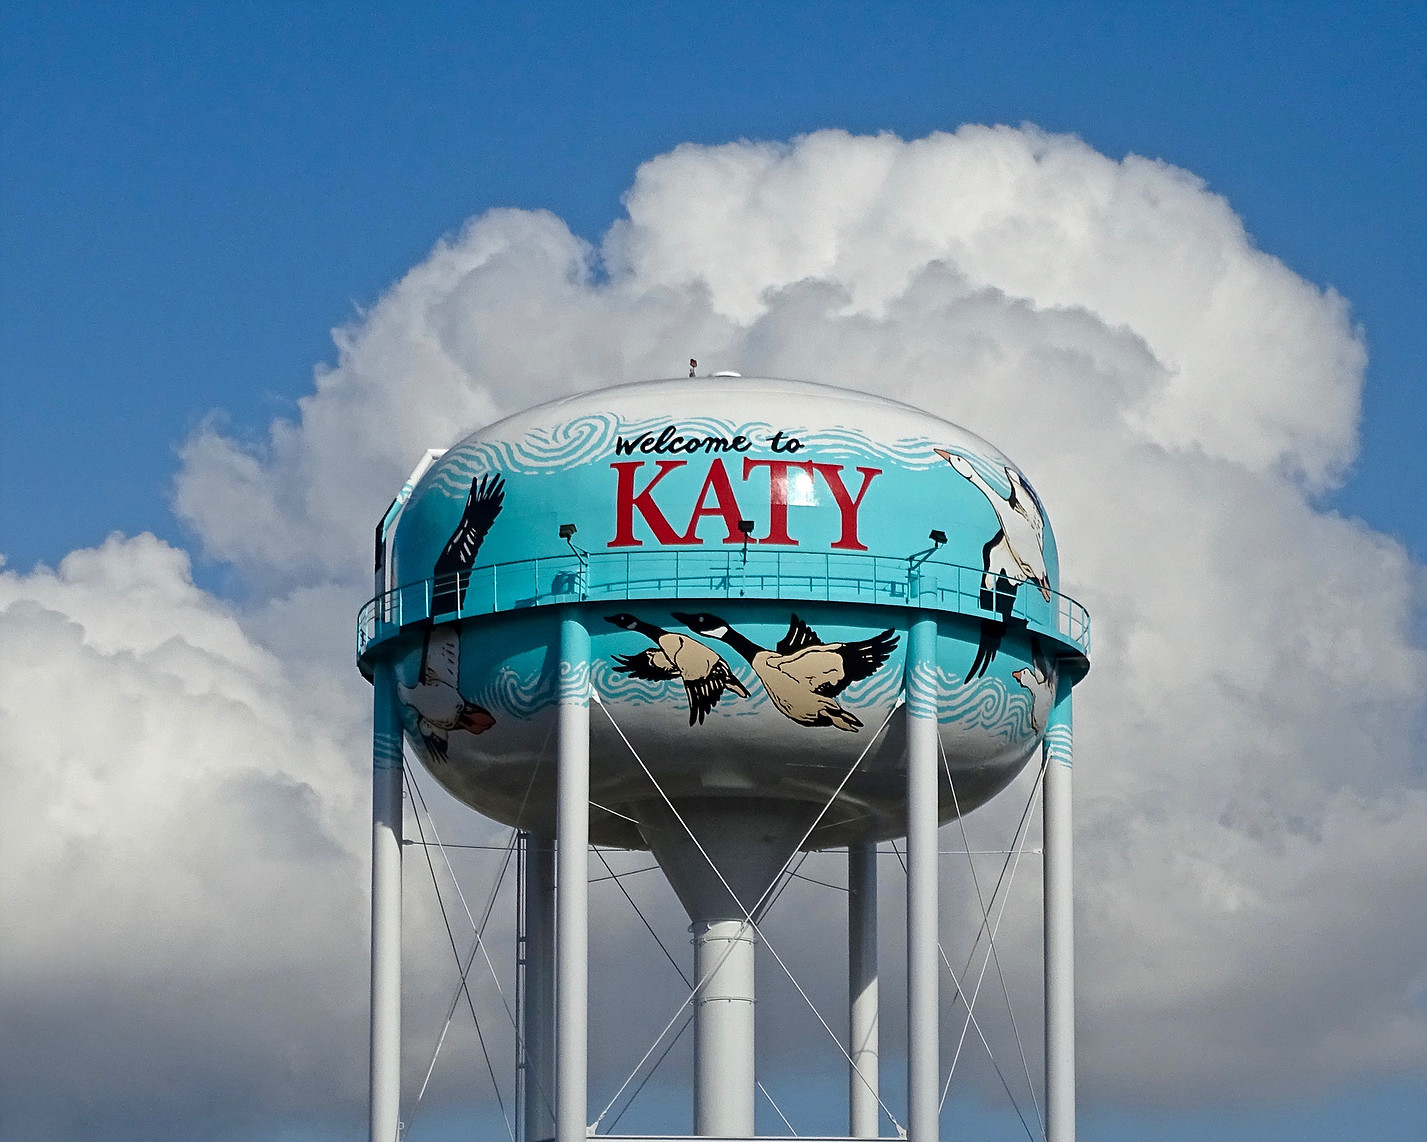 Water tank murals are being painted all around the United States to beautify towns and cities. Here, we analyze one of the best by the Goetzinger brothers.